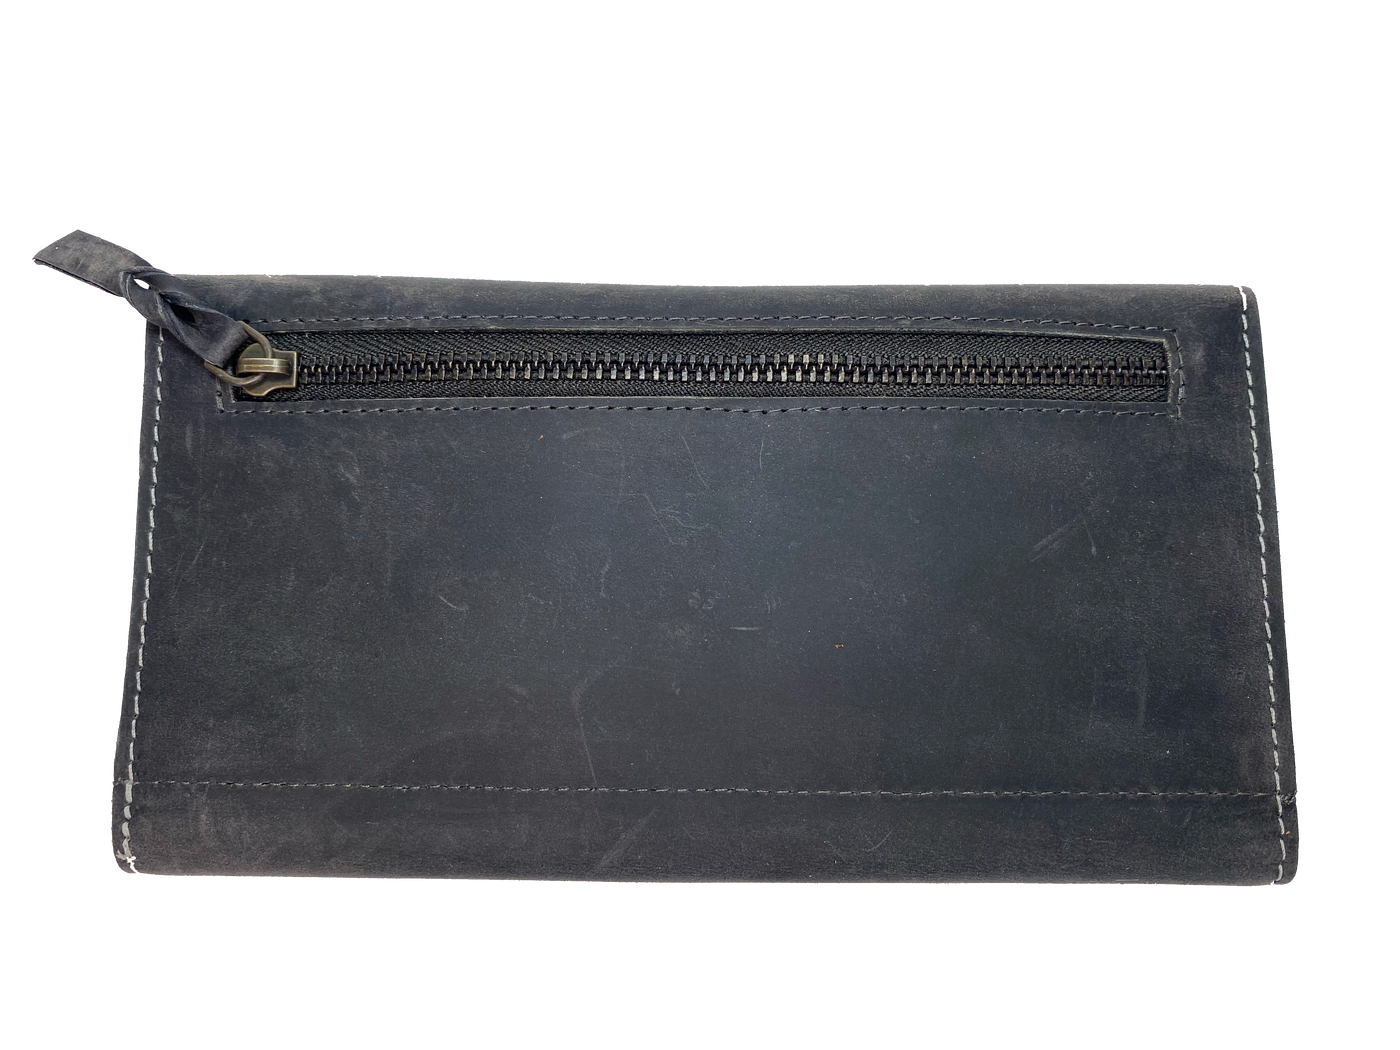 Ladies Leather Distressed Clutch Style Wallet